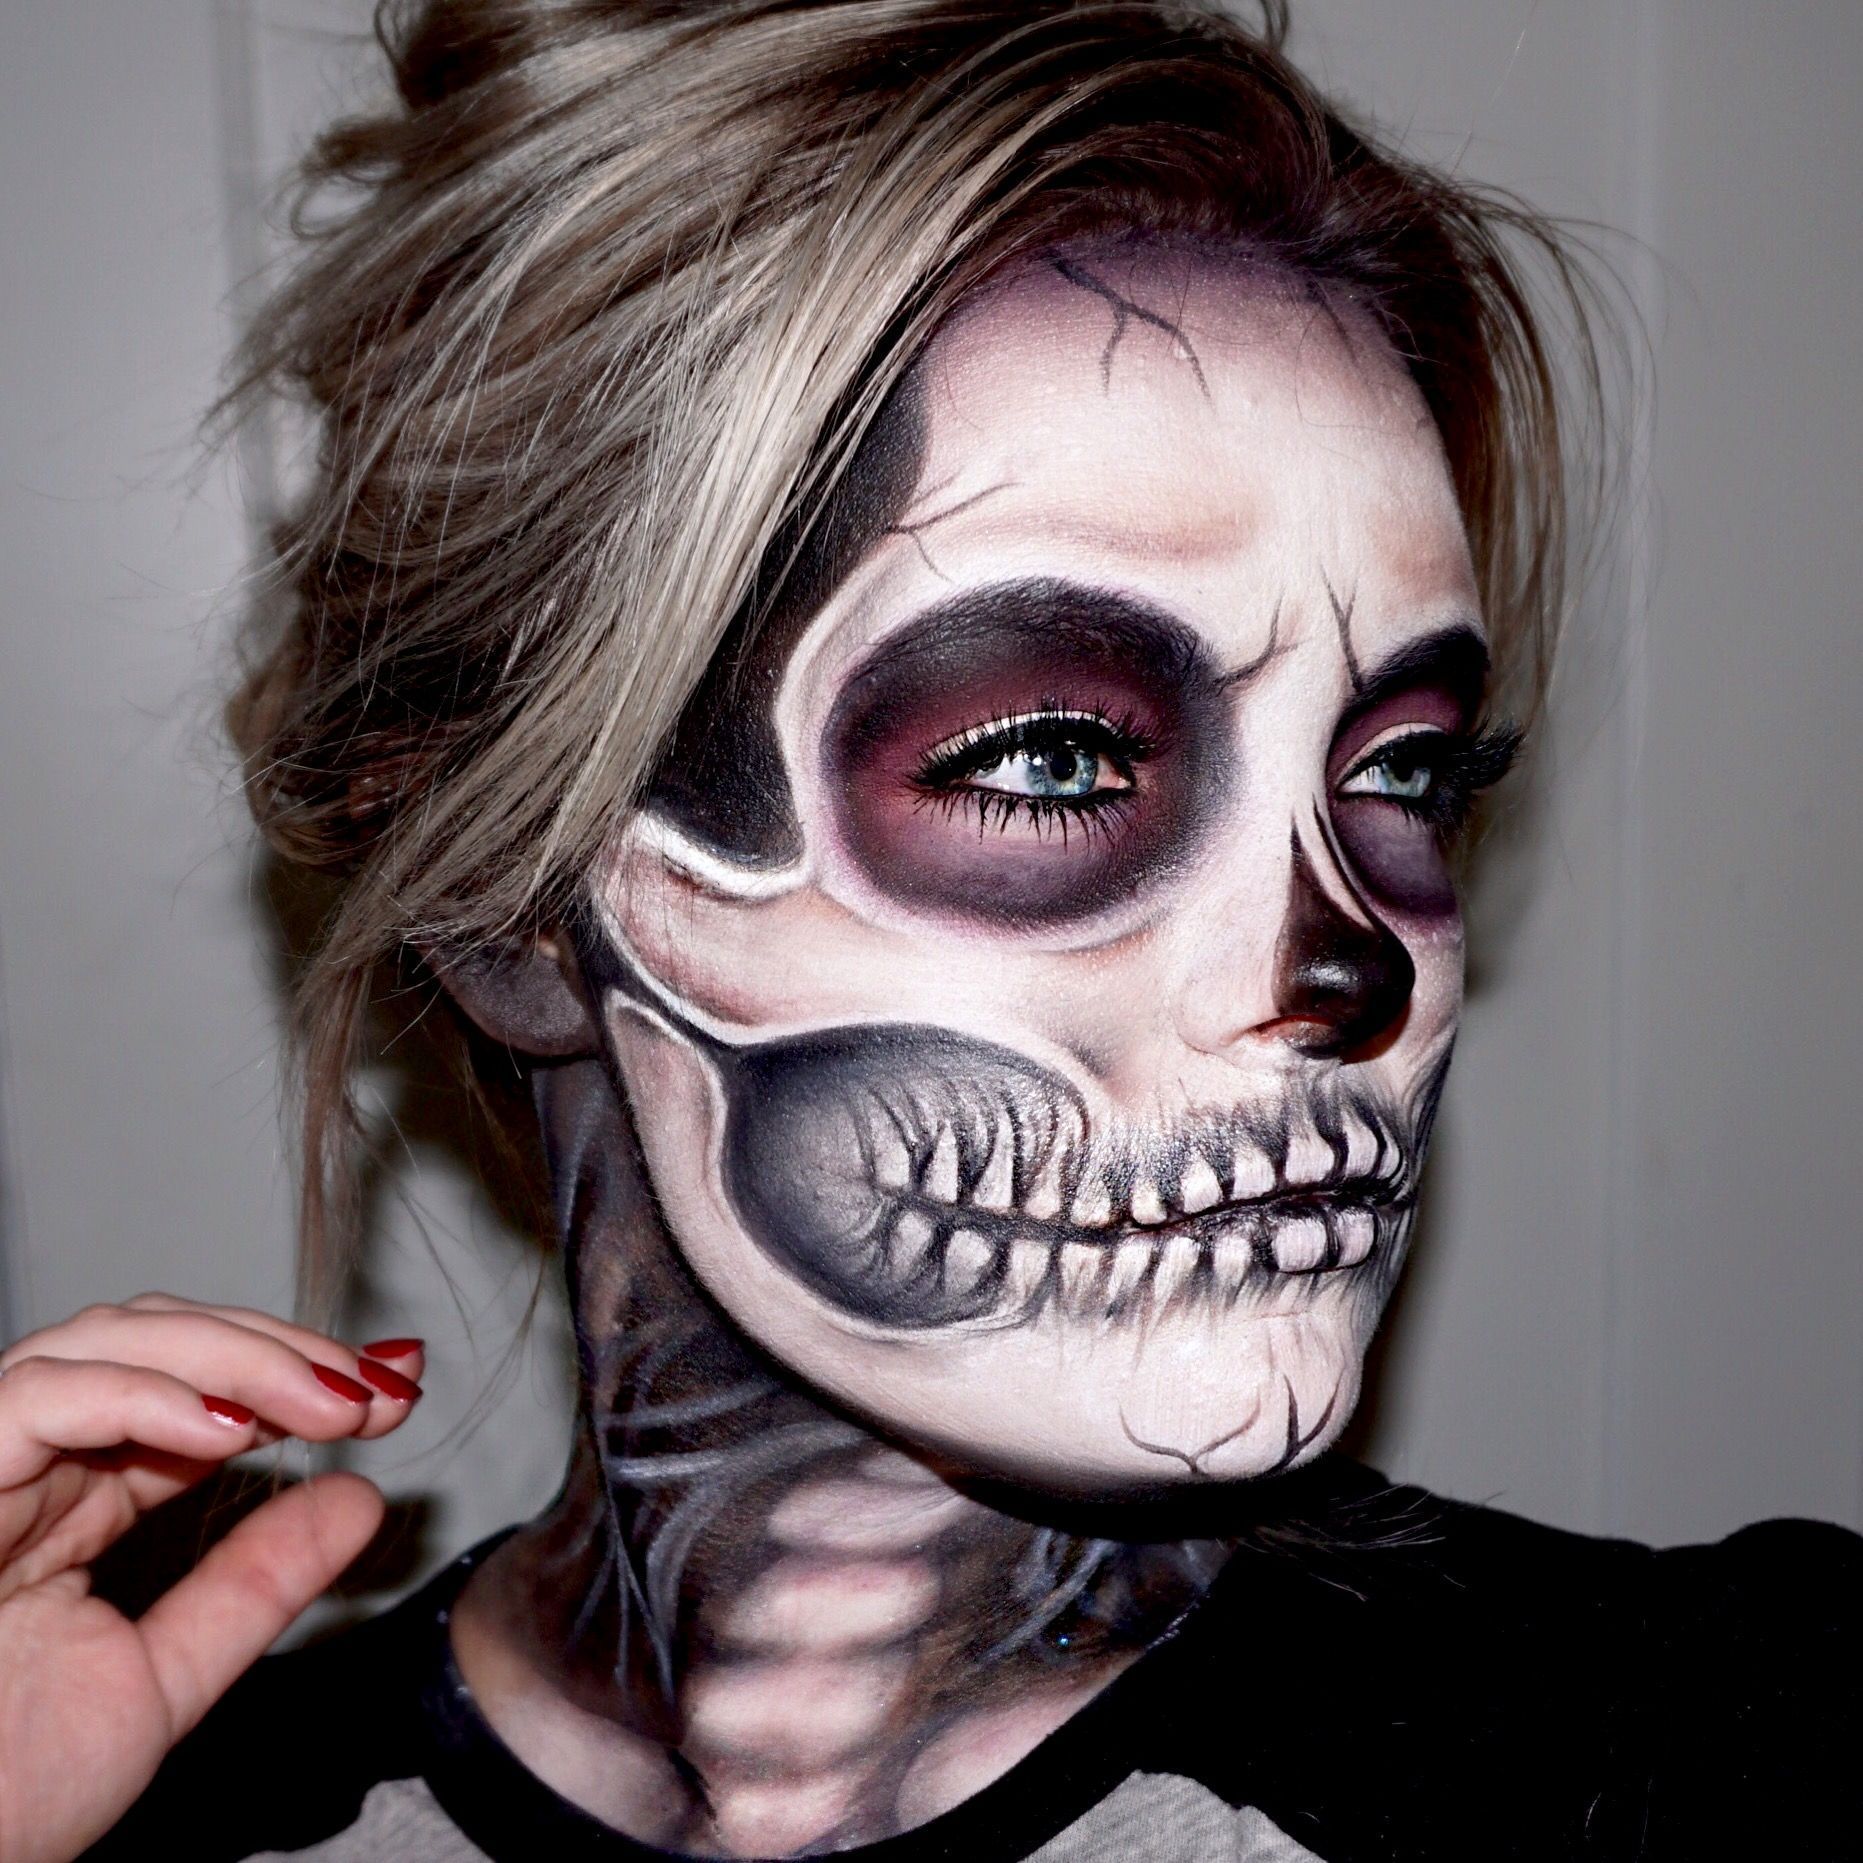 Halloween Schminktipps Luxus This is A Perfect Look for Halloween Use White and Black